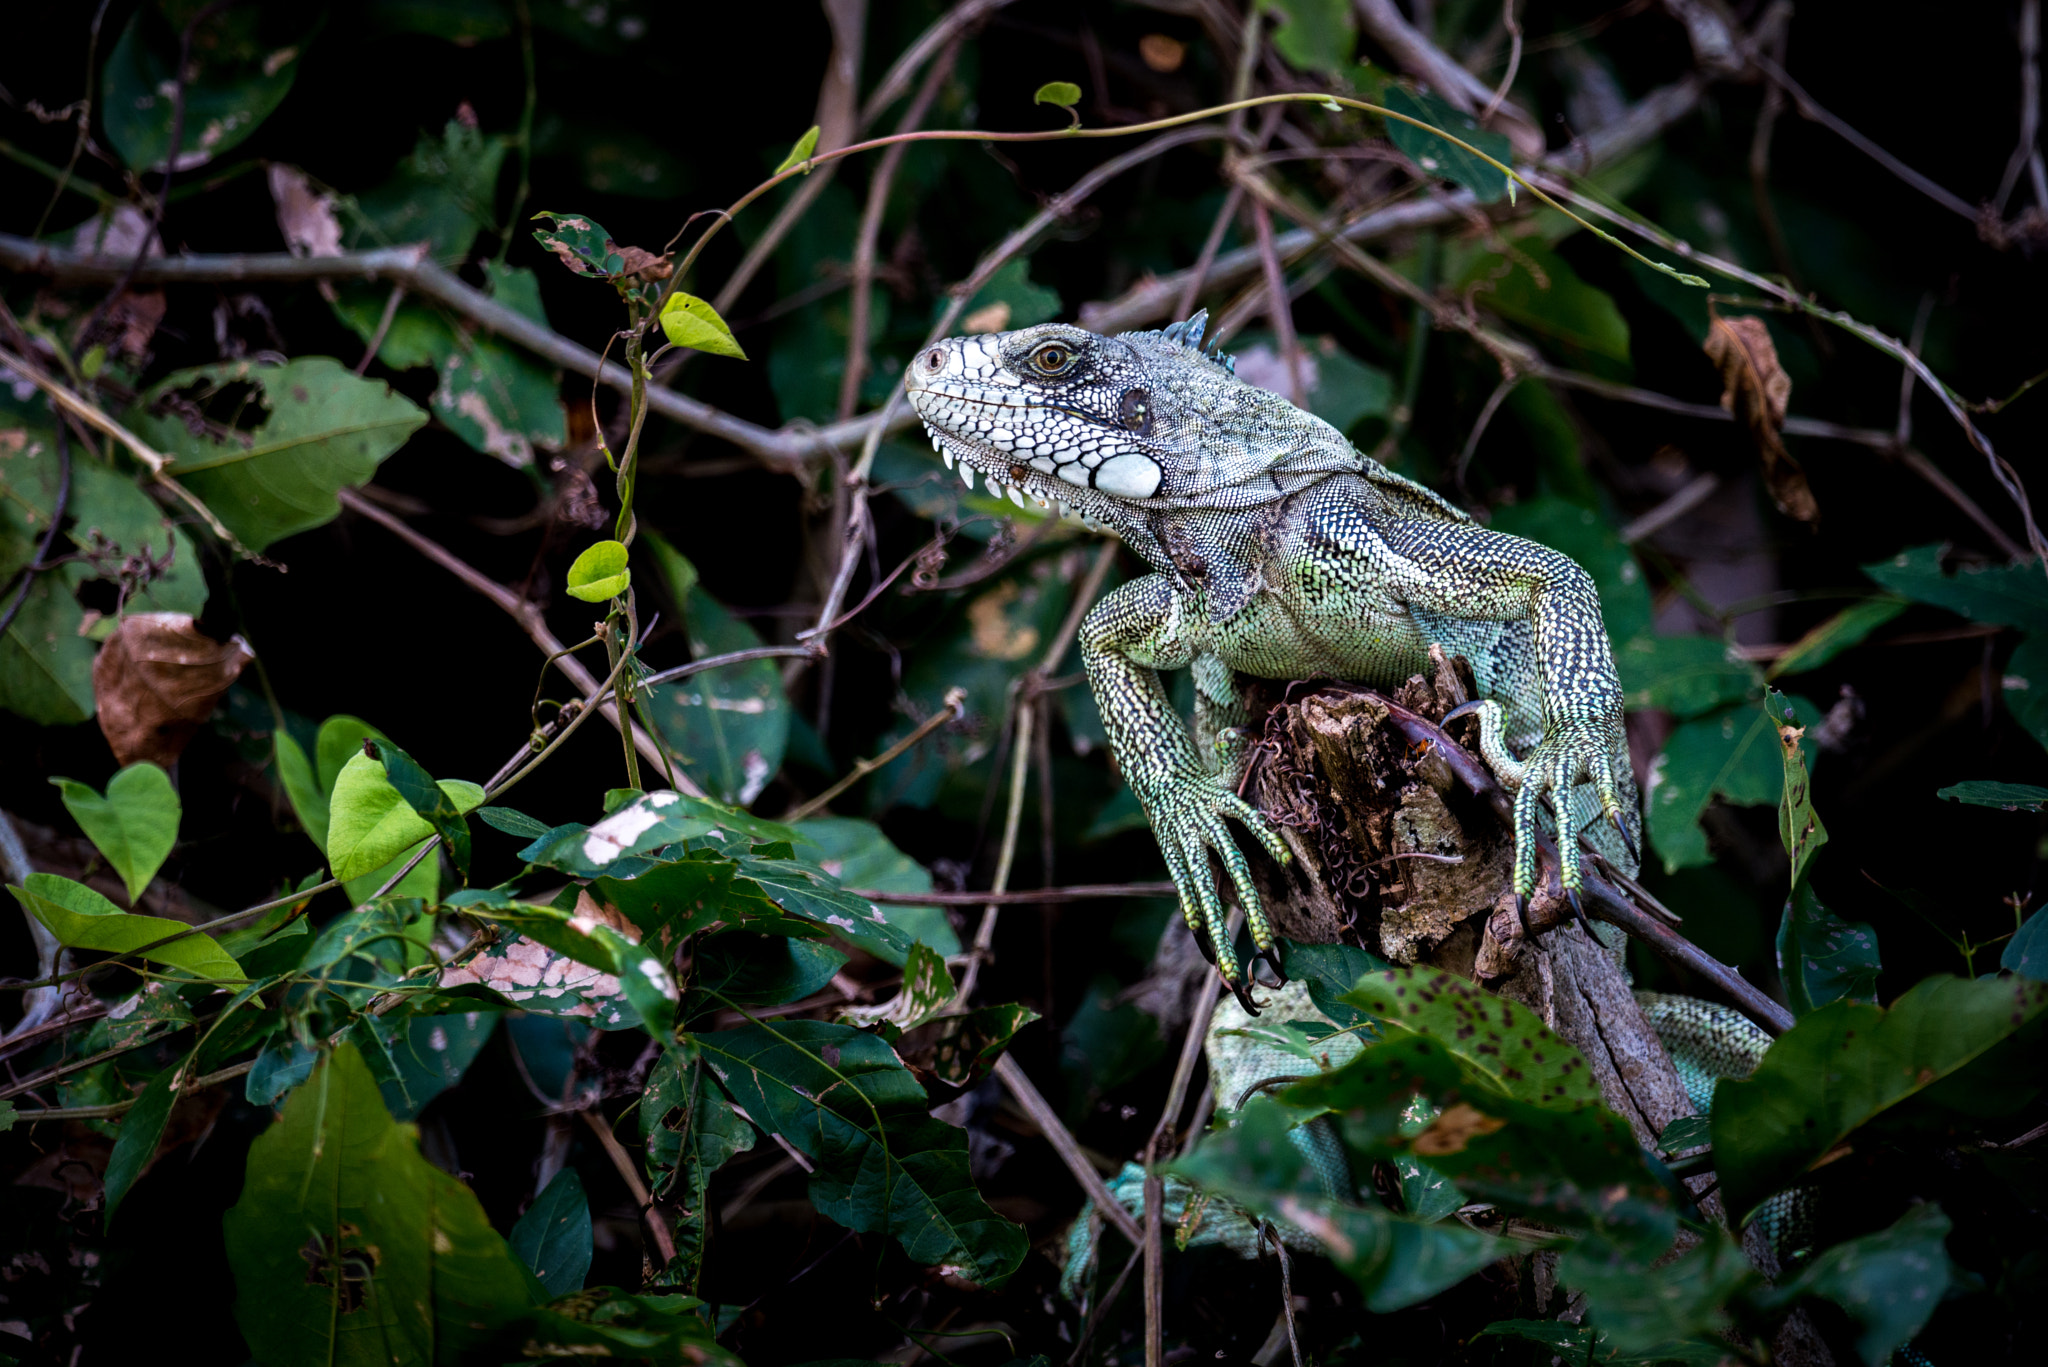 Nikon D800 sample photo. Green iguana perched on branch among leaves photography